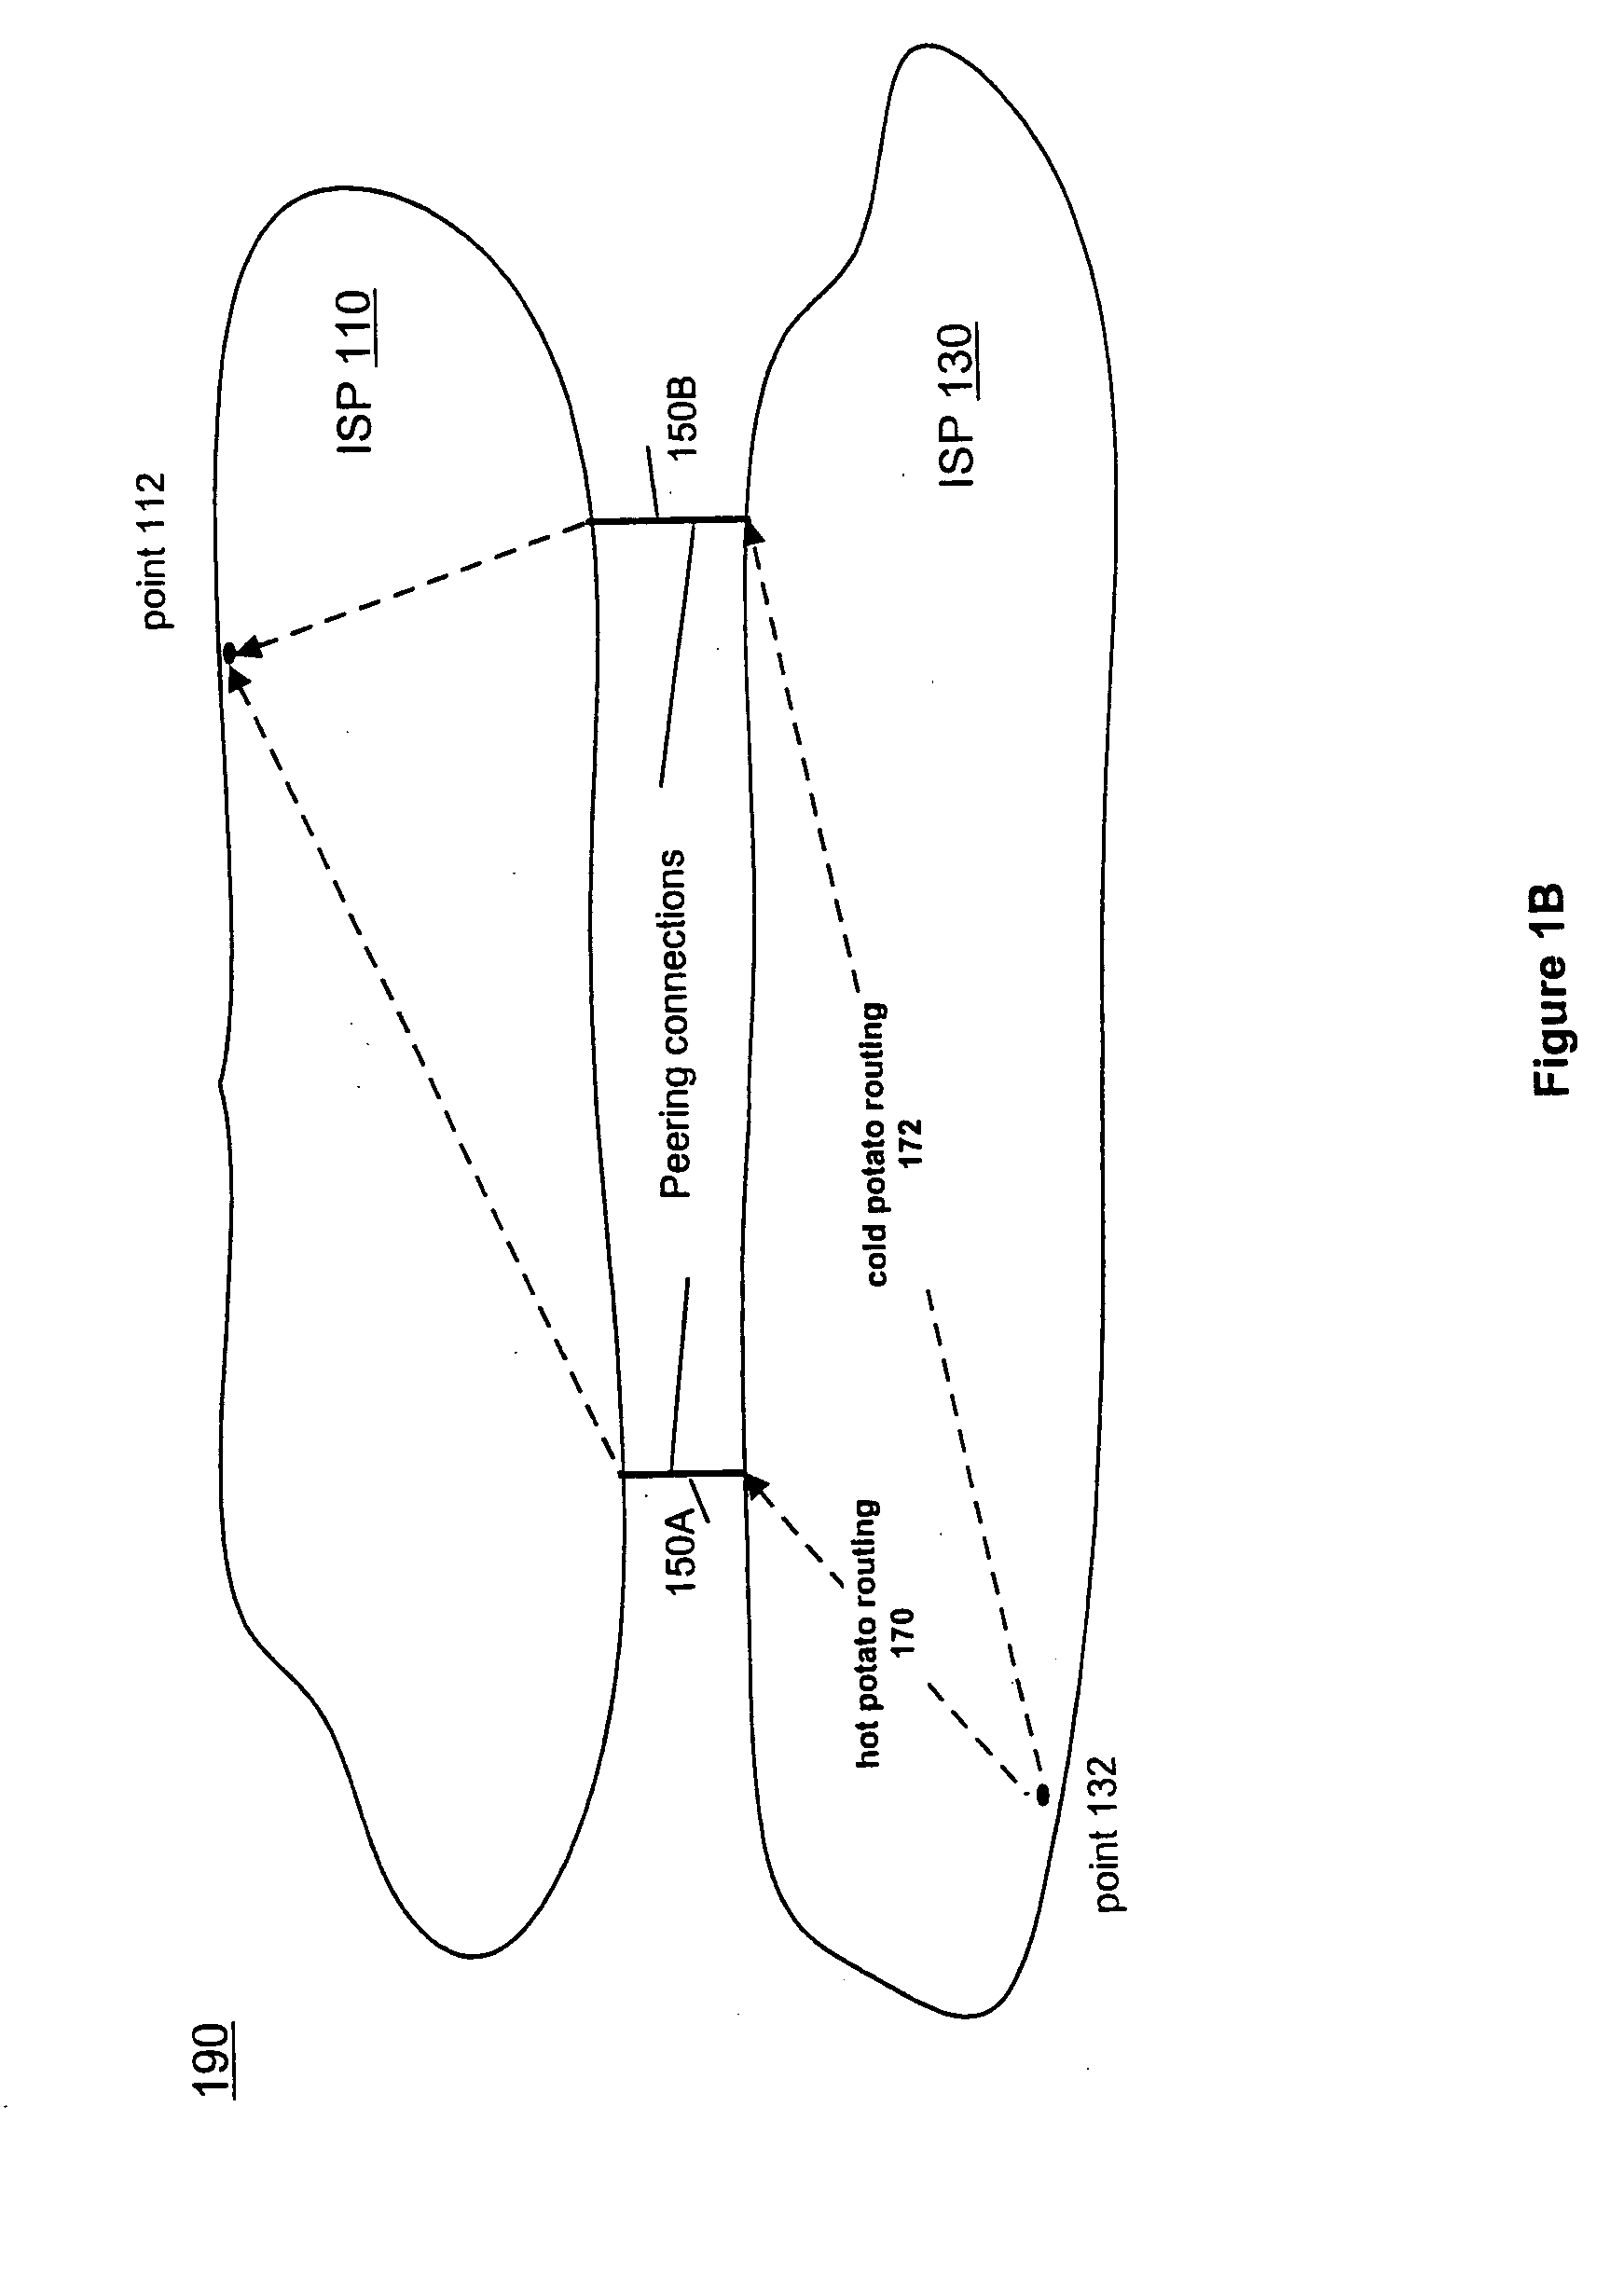 Internet route deaggregation and route selection preferencing